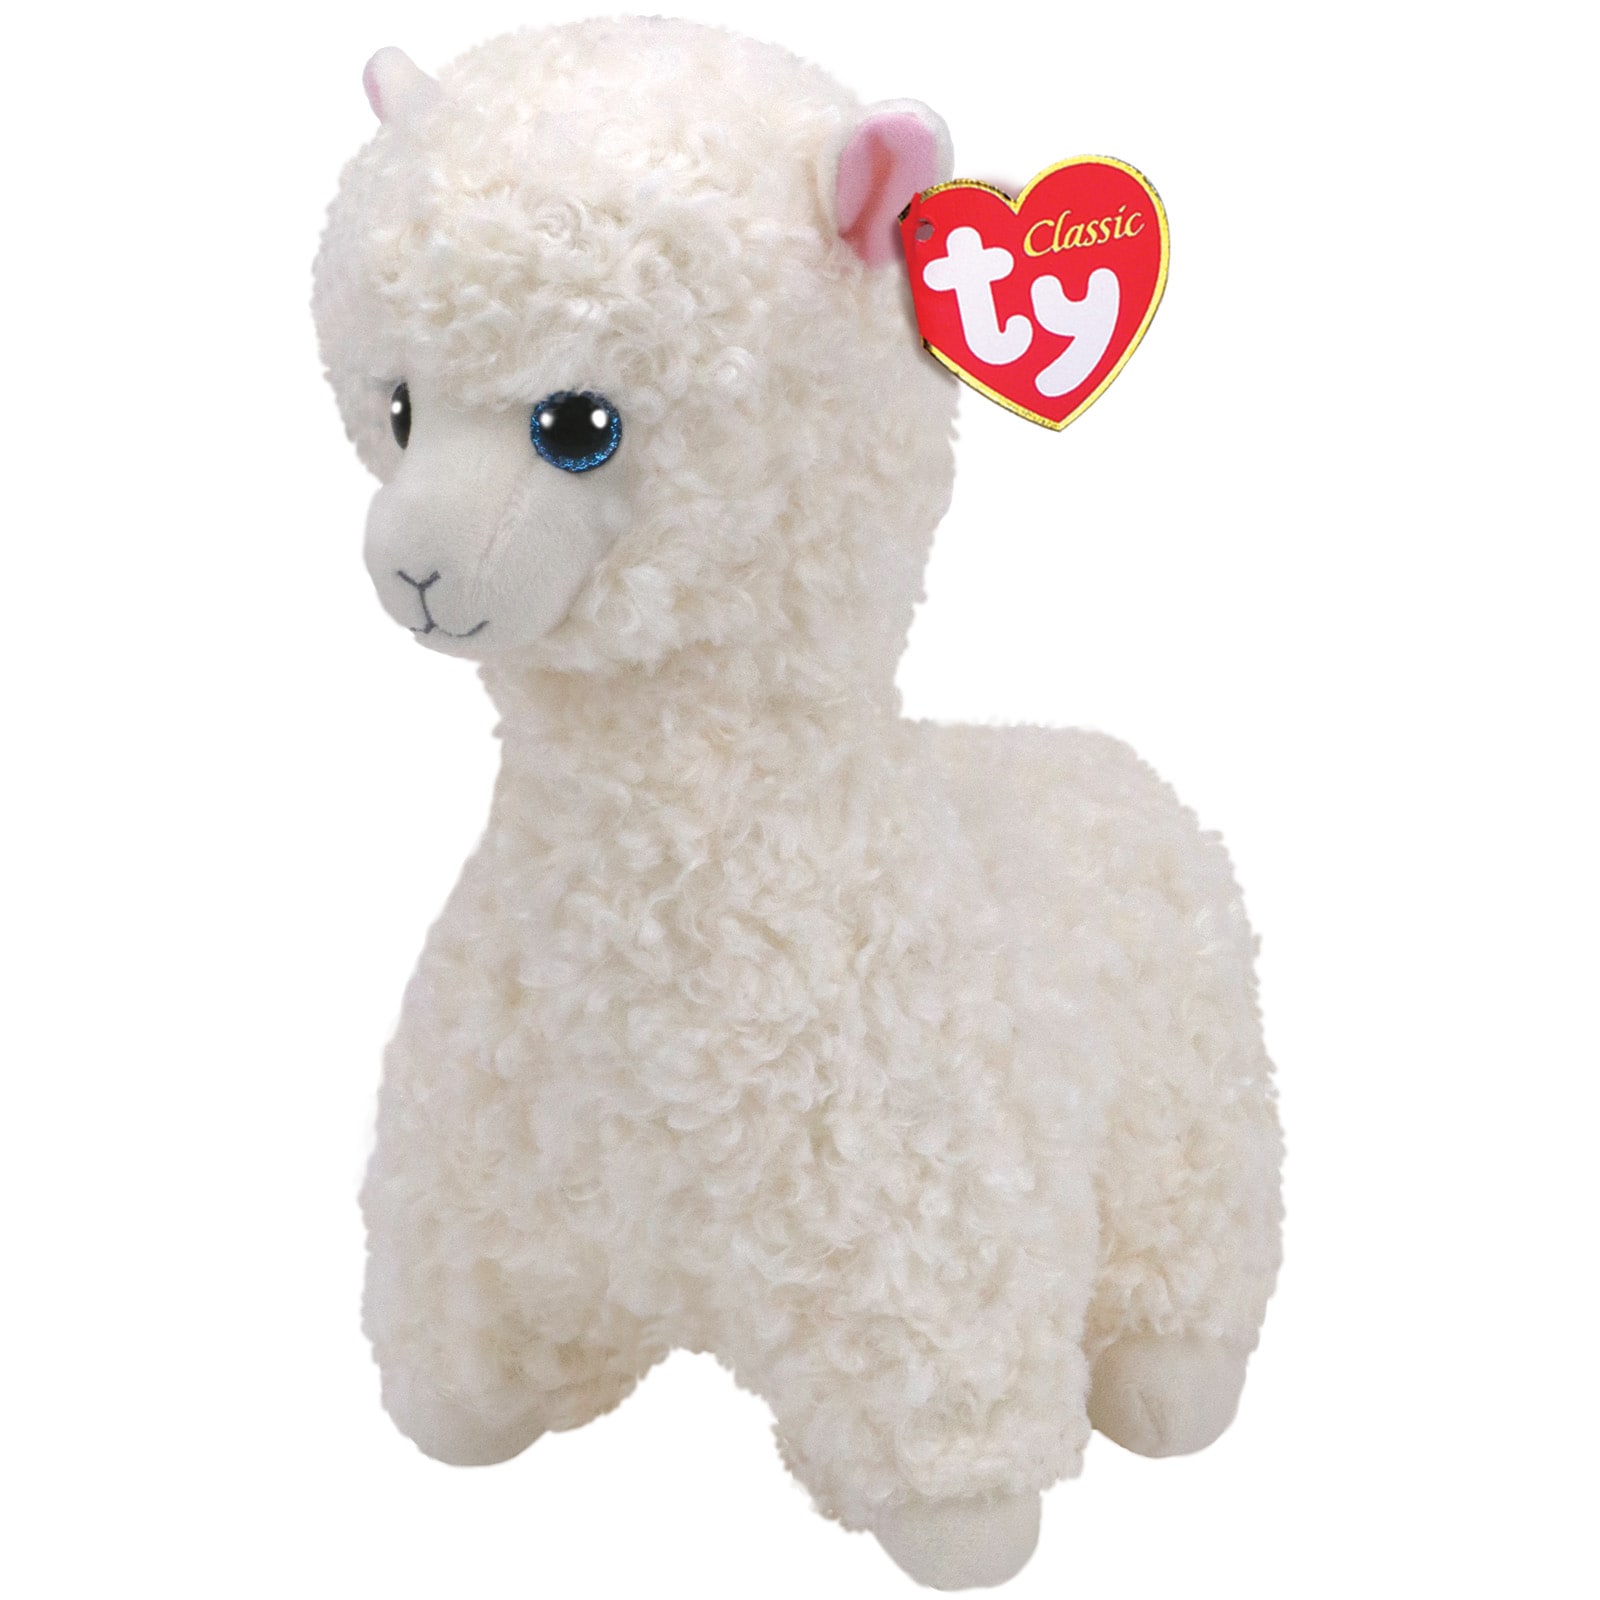 New with tags Ty Beanie Babies Lily Llama Plush Free Shipping 